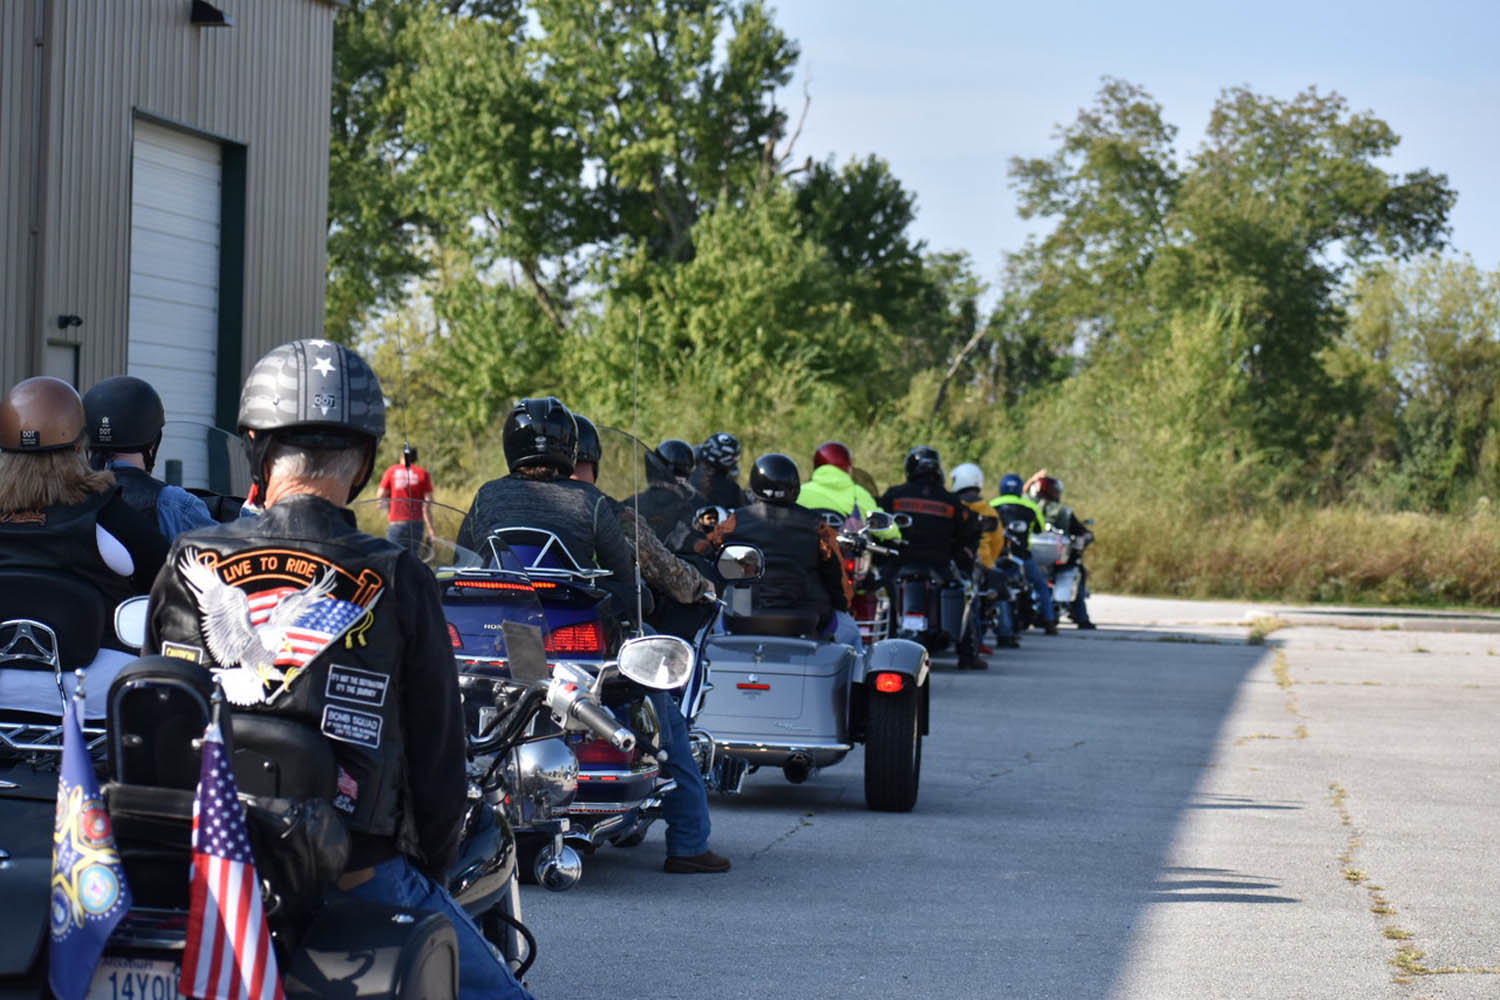 RIDE ON
Motorcyclists prepare to hit the road before Victory Mission’s 25th annual Victory Ride on Oct. 5. The event raised $17,500 toward the mission’s residential rehabilitation program – a tally that will provide 1,176 nights of shelter. This year, riders traveled 40-50 miles through the scenic Ozarks countryside and cruised Commercial Street.